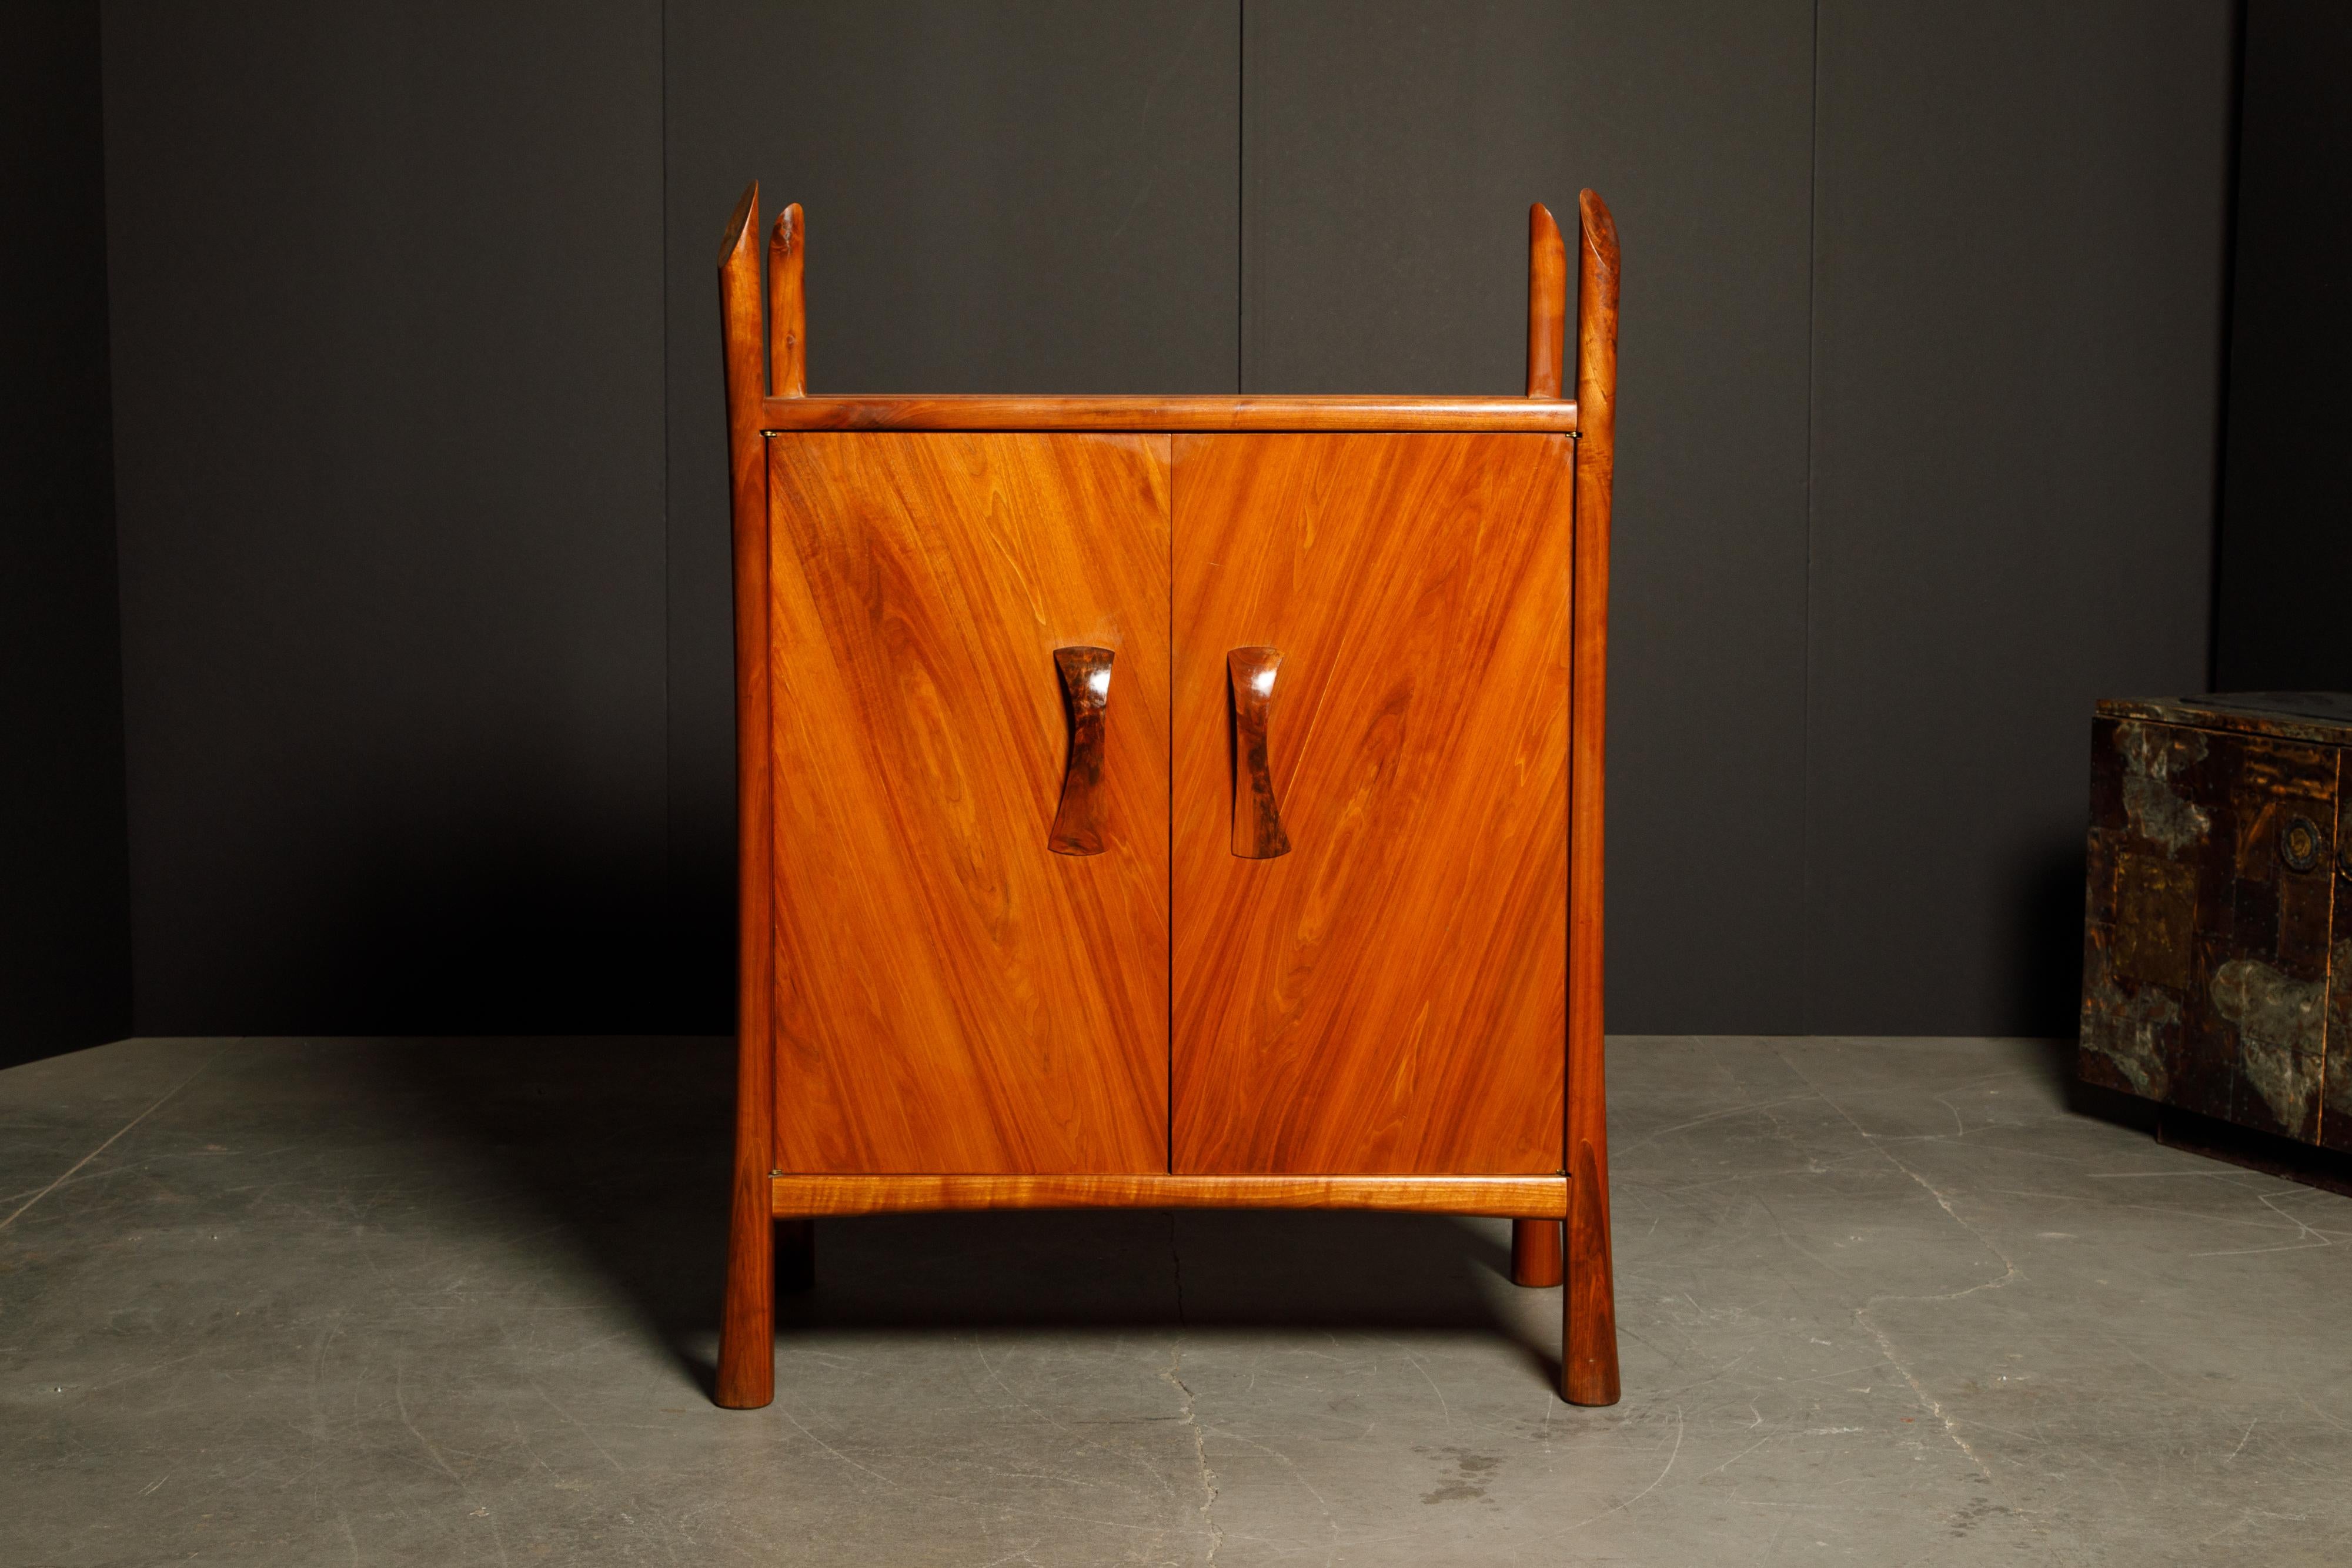 An incredibly beautiful studio case piece by New Hope craftsman Robert Whitley featuring solid sculptural walnut legs which extend upwards above the top of the cabinet giving this statement piece a bit of a sinister look, highly figured walnut